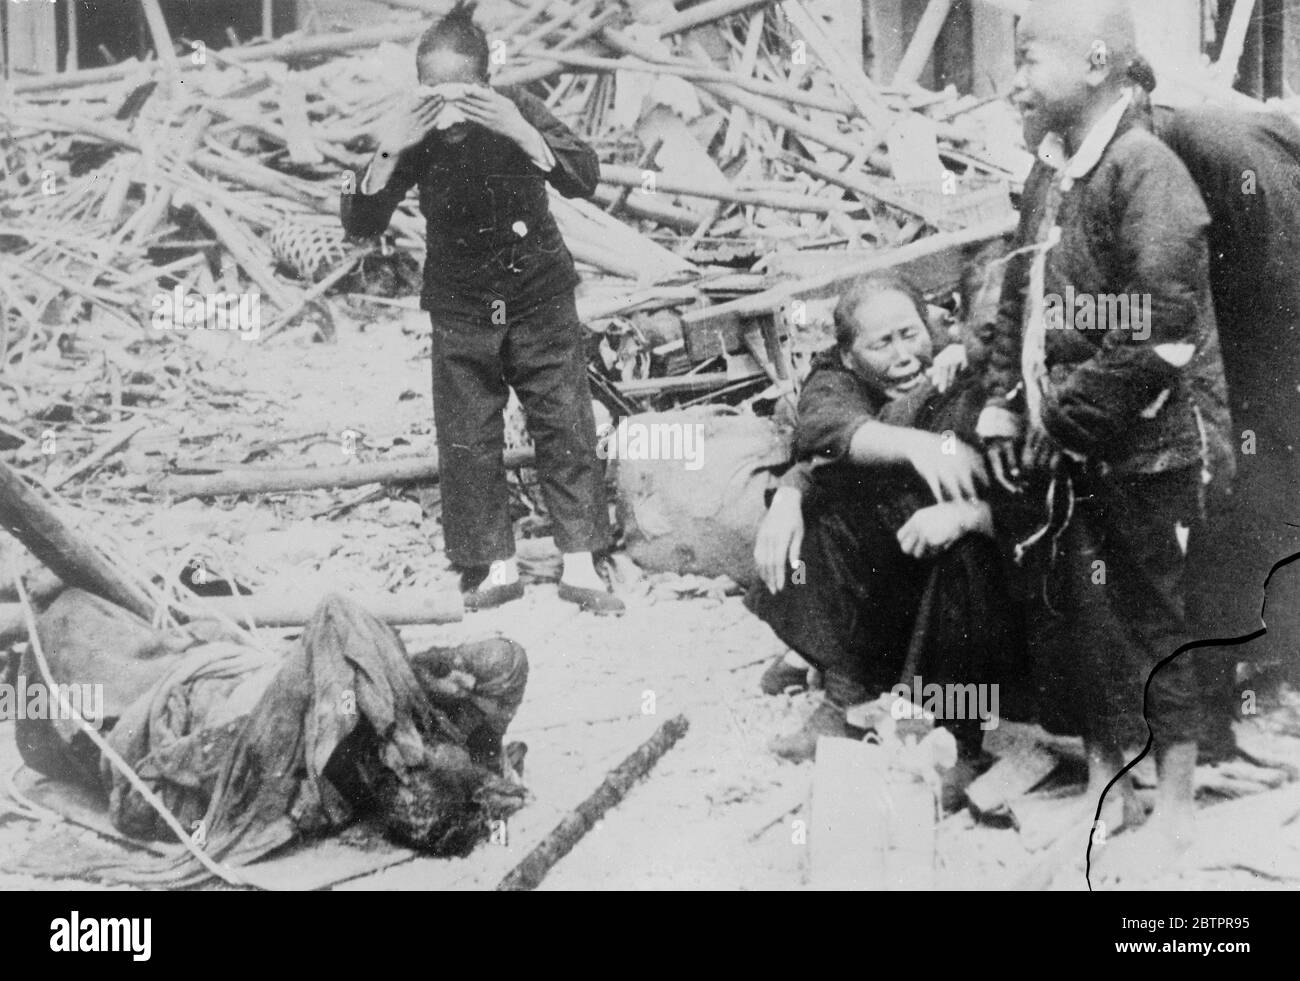 Just another death. But the world has crashed!. Sobbing heart brokenly among the ruins of the home, this Chinese family mourns-just another victim of the war machine, but the one who meant the whole world to them!. 16 January 1938 Stock Photo